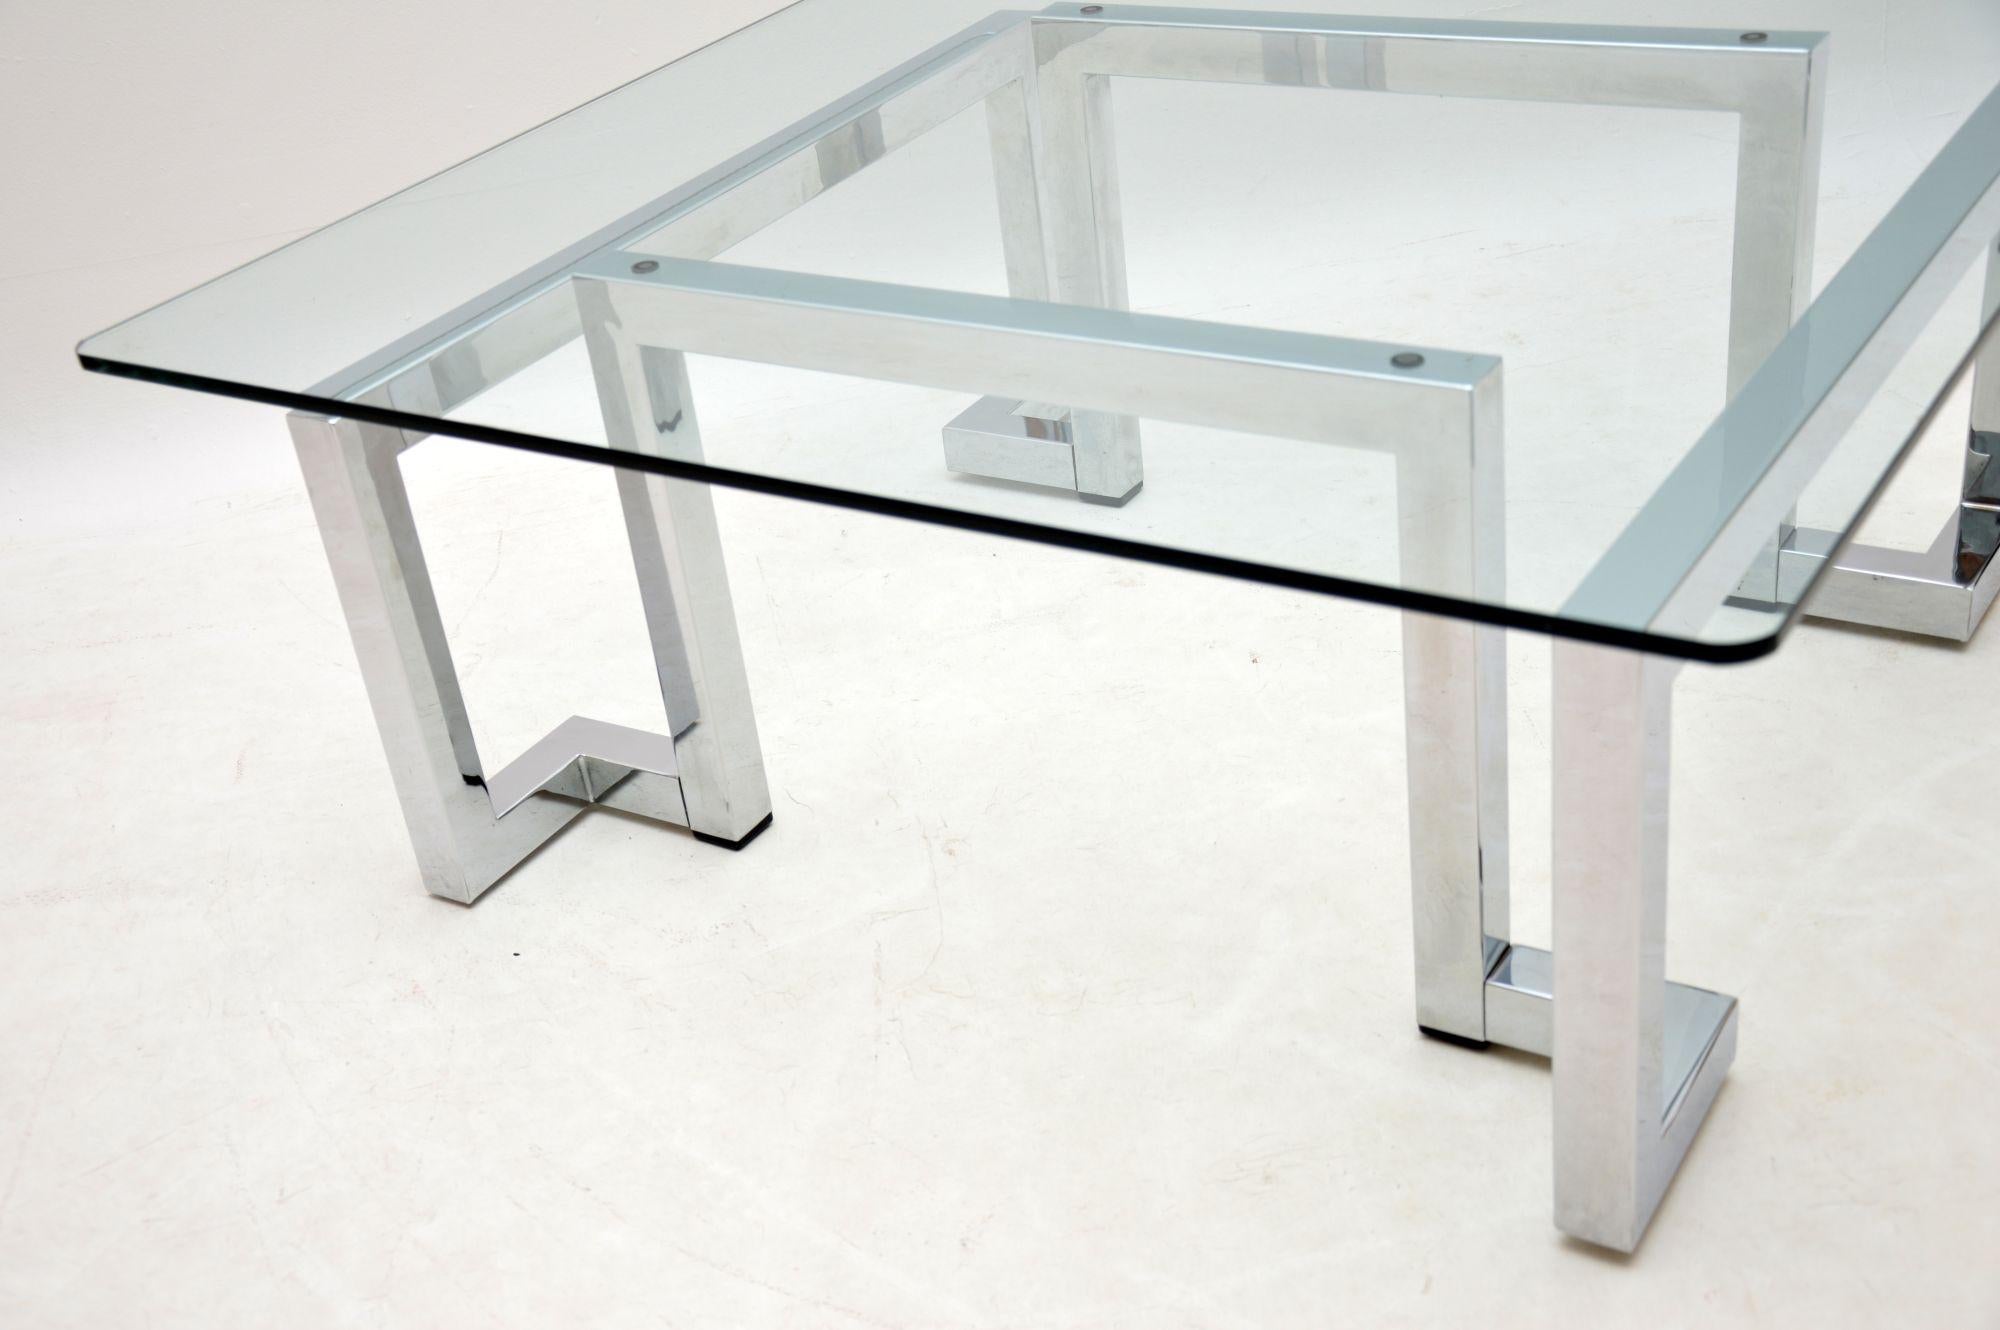 Late 20th Century 1970s Vintage Chrome and Glass Coffee Table by Pieff